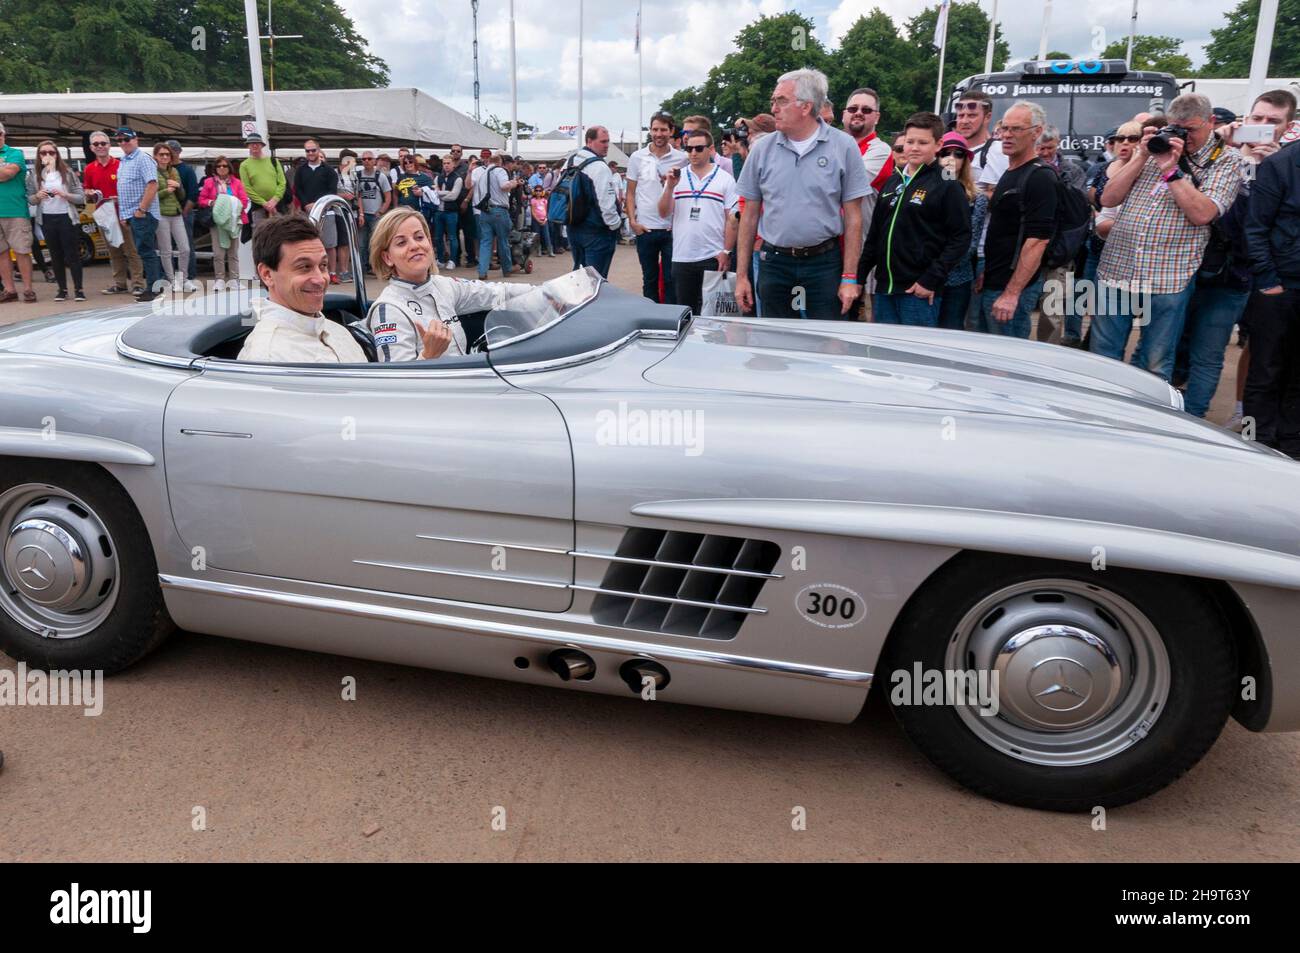 Toto Wolff and Susie Wolff at Goodwood Festival of Speed, UK, 2016, driving a Mercedes-Benz 300 SL through the public areas with people watching Stock Photo